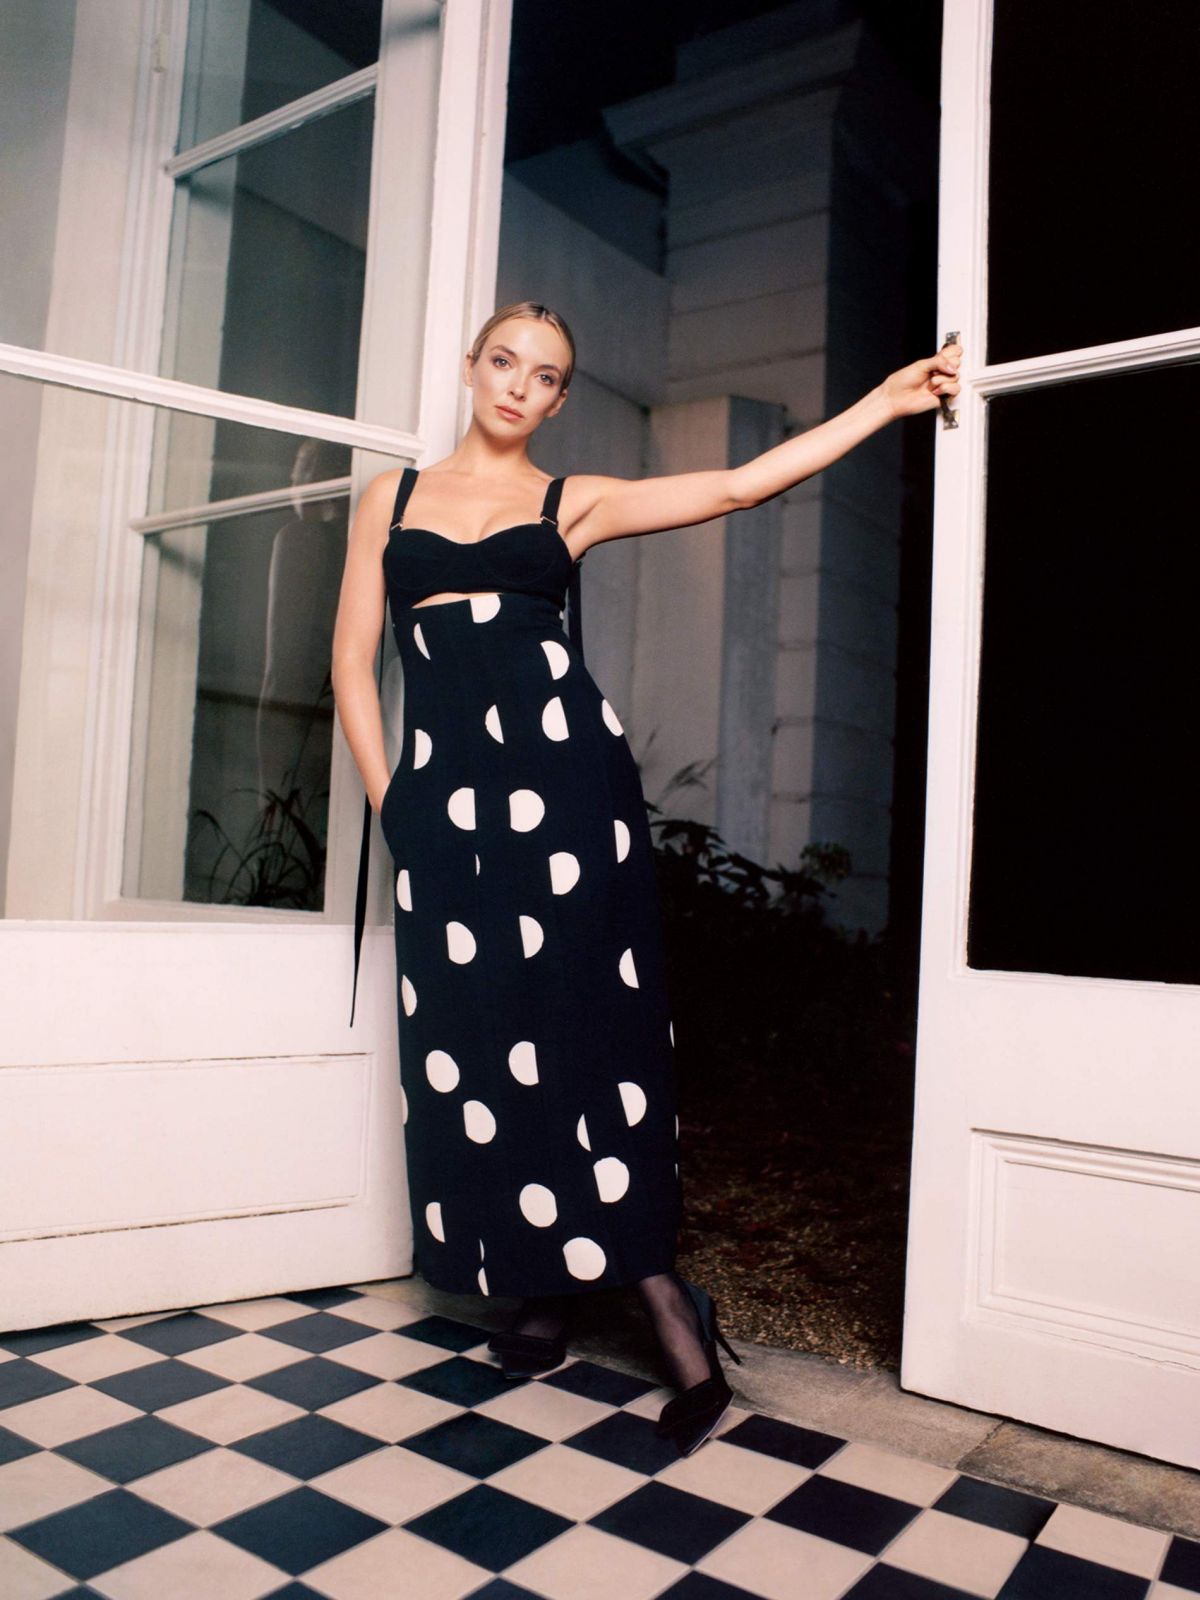 jodie-comer-for-the-edit-by-net-a-porter-november-2020-1.jpg